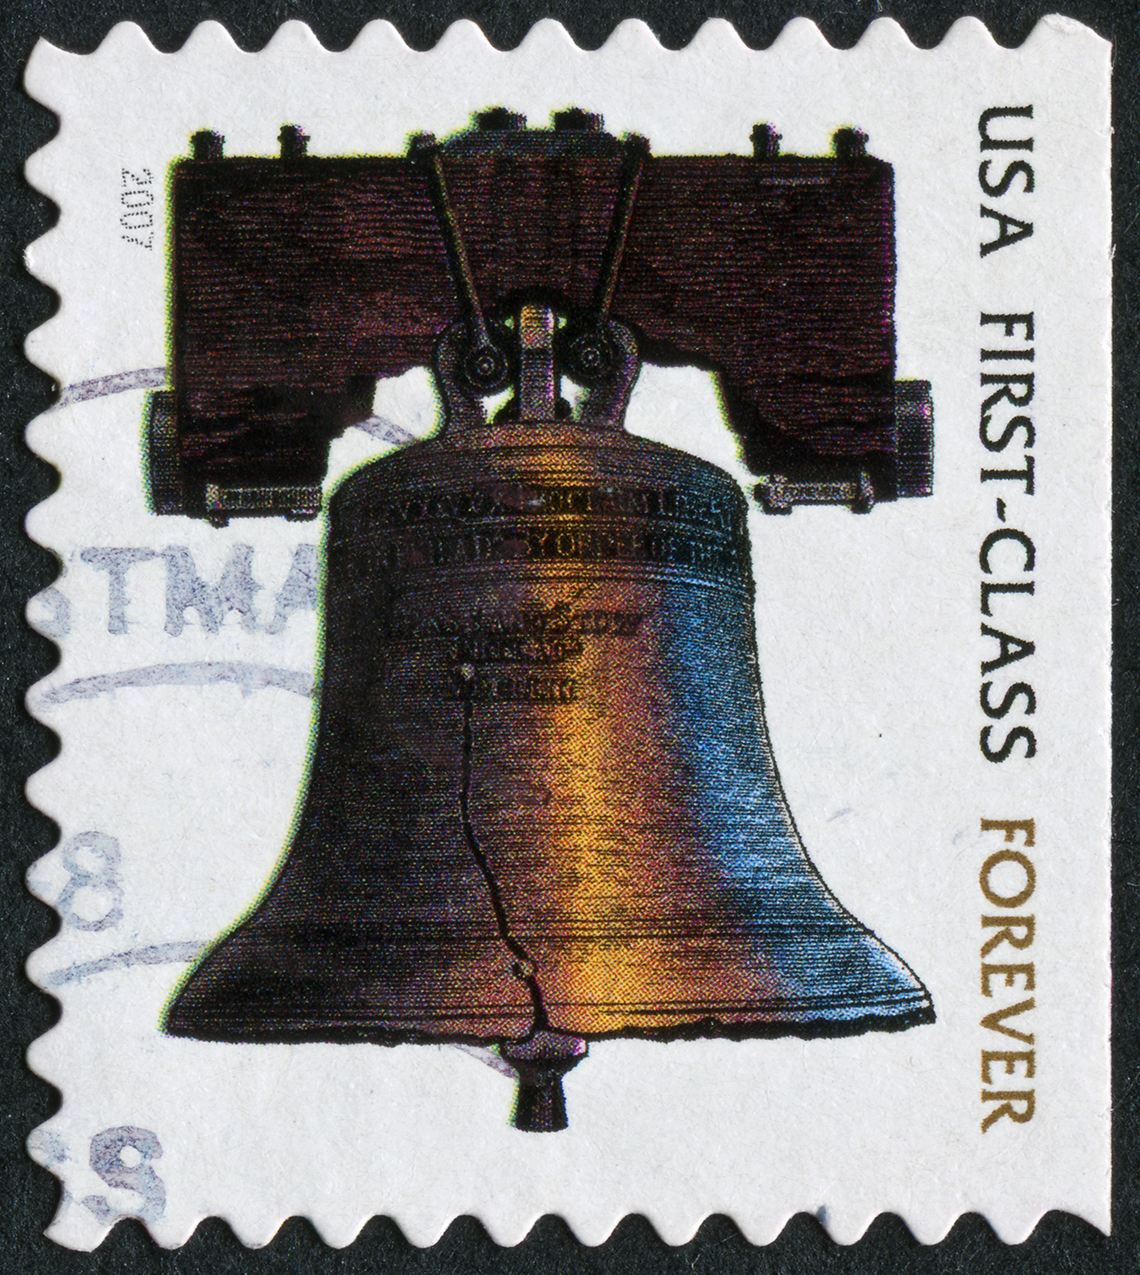 u s a first class forever postage stamp with image of liberty bell on the stamp